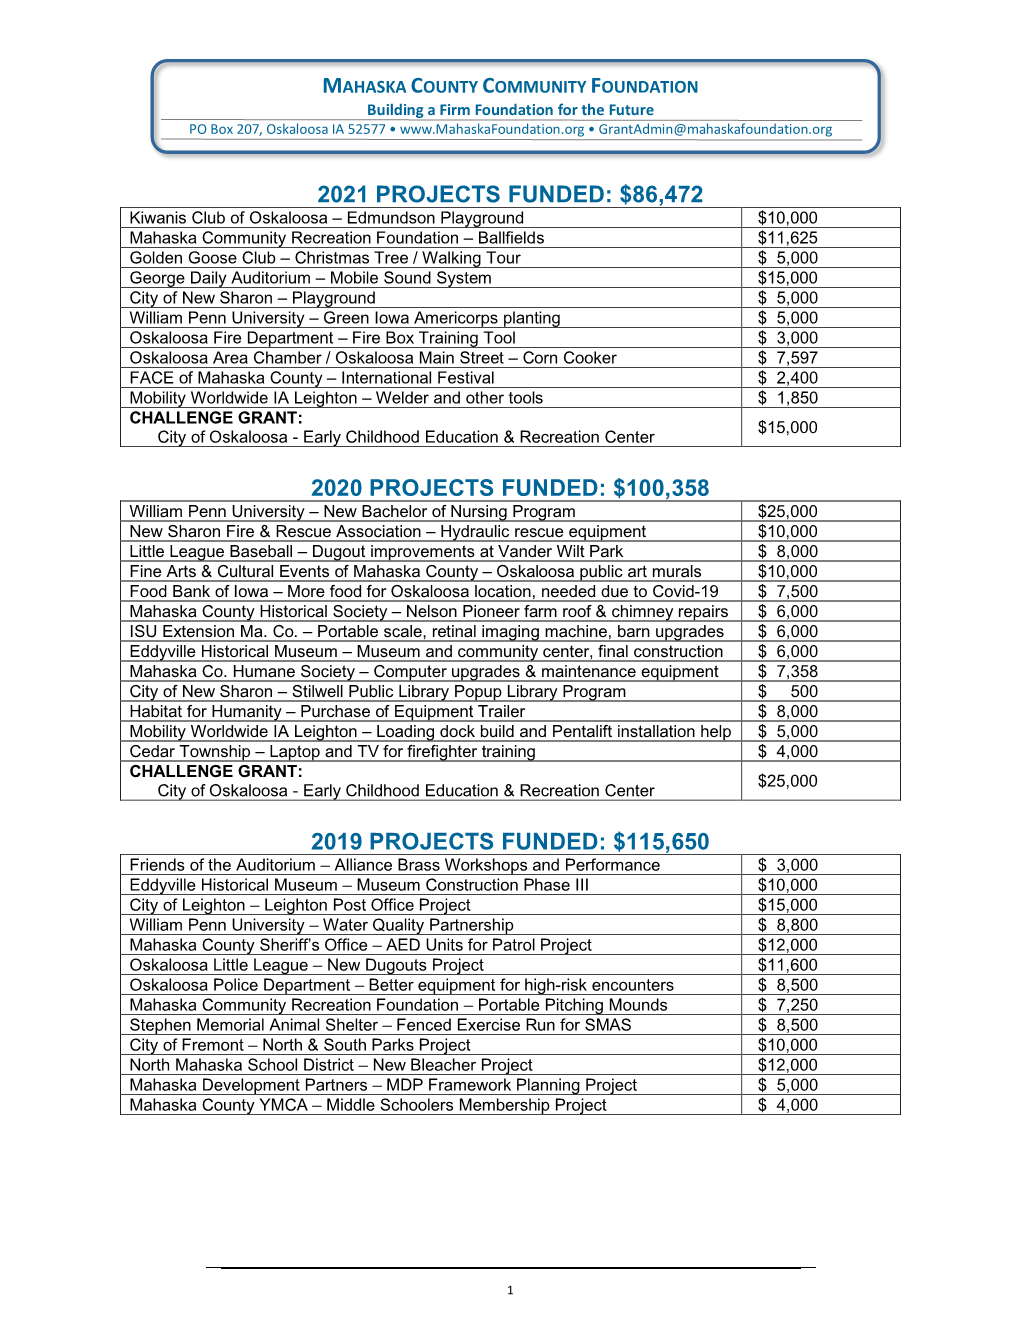 2021 Projects Funded